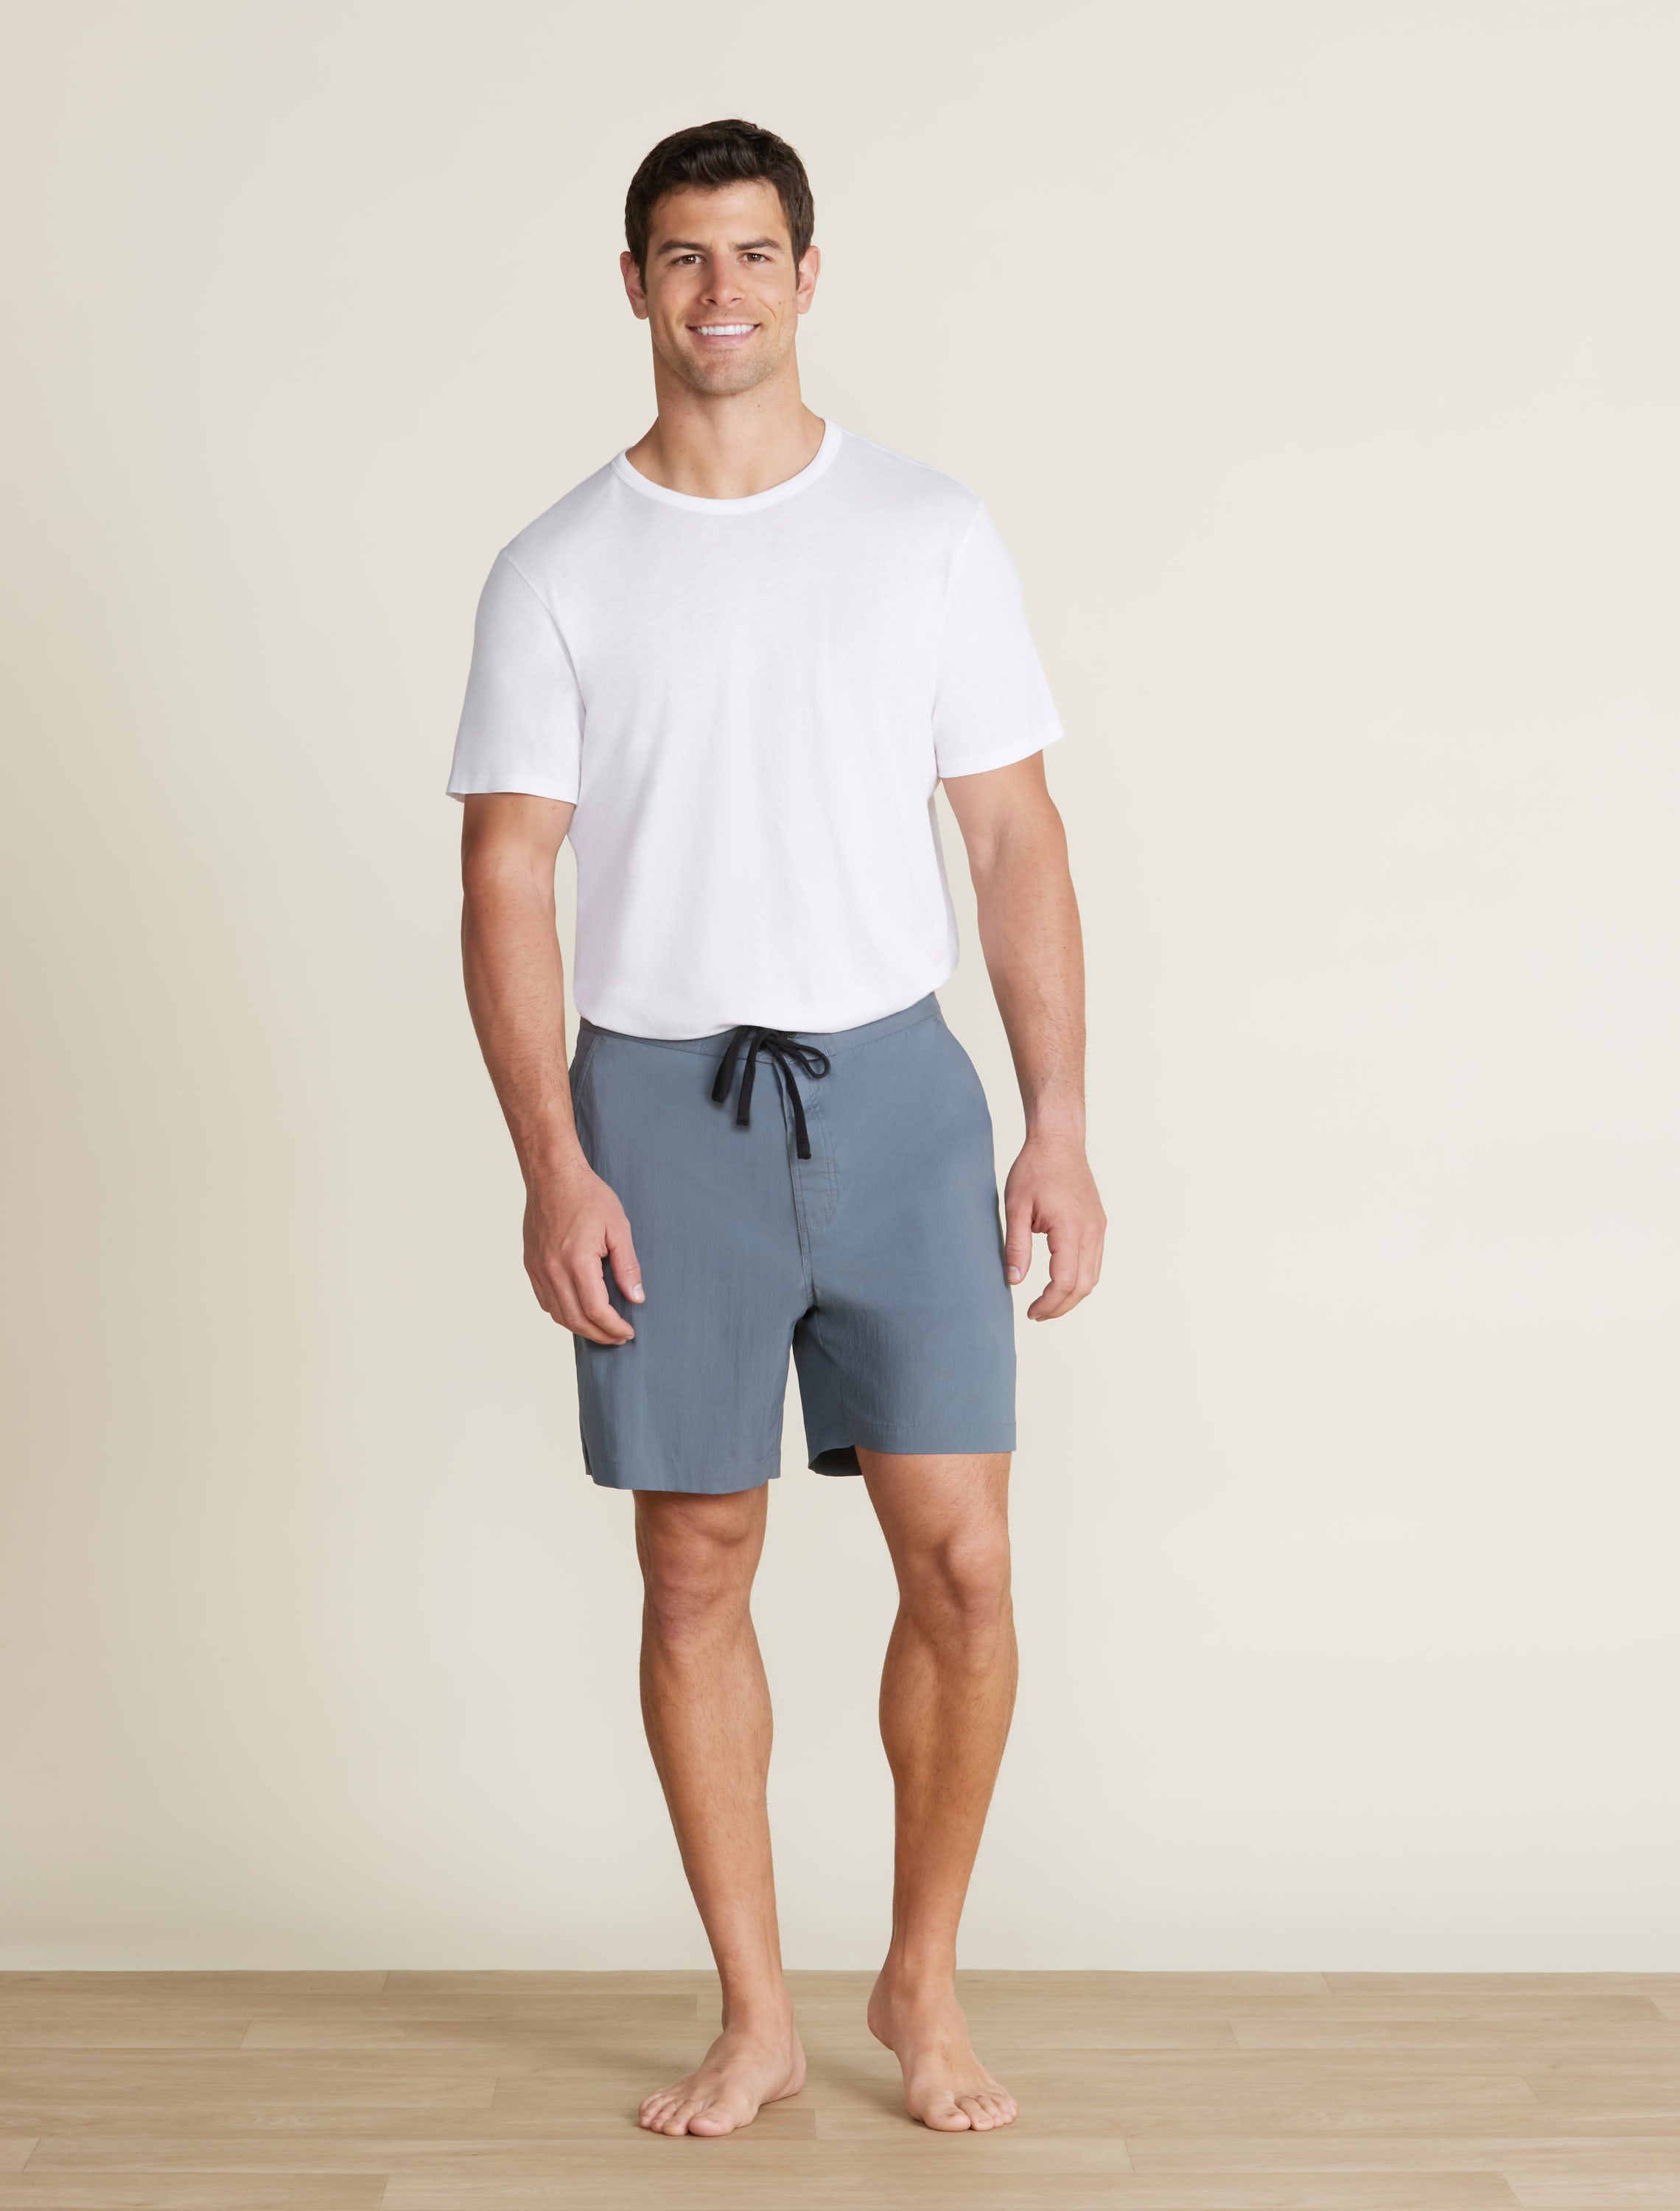 Casual, Comfortable Lounge Shorts for Men  Barefoot Dreams® Official Site  - Loungewear, Apparel, Blankets